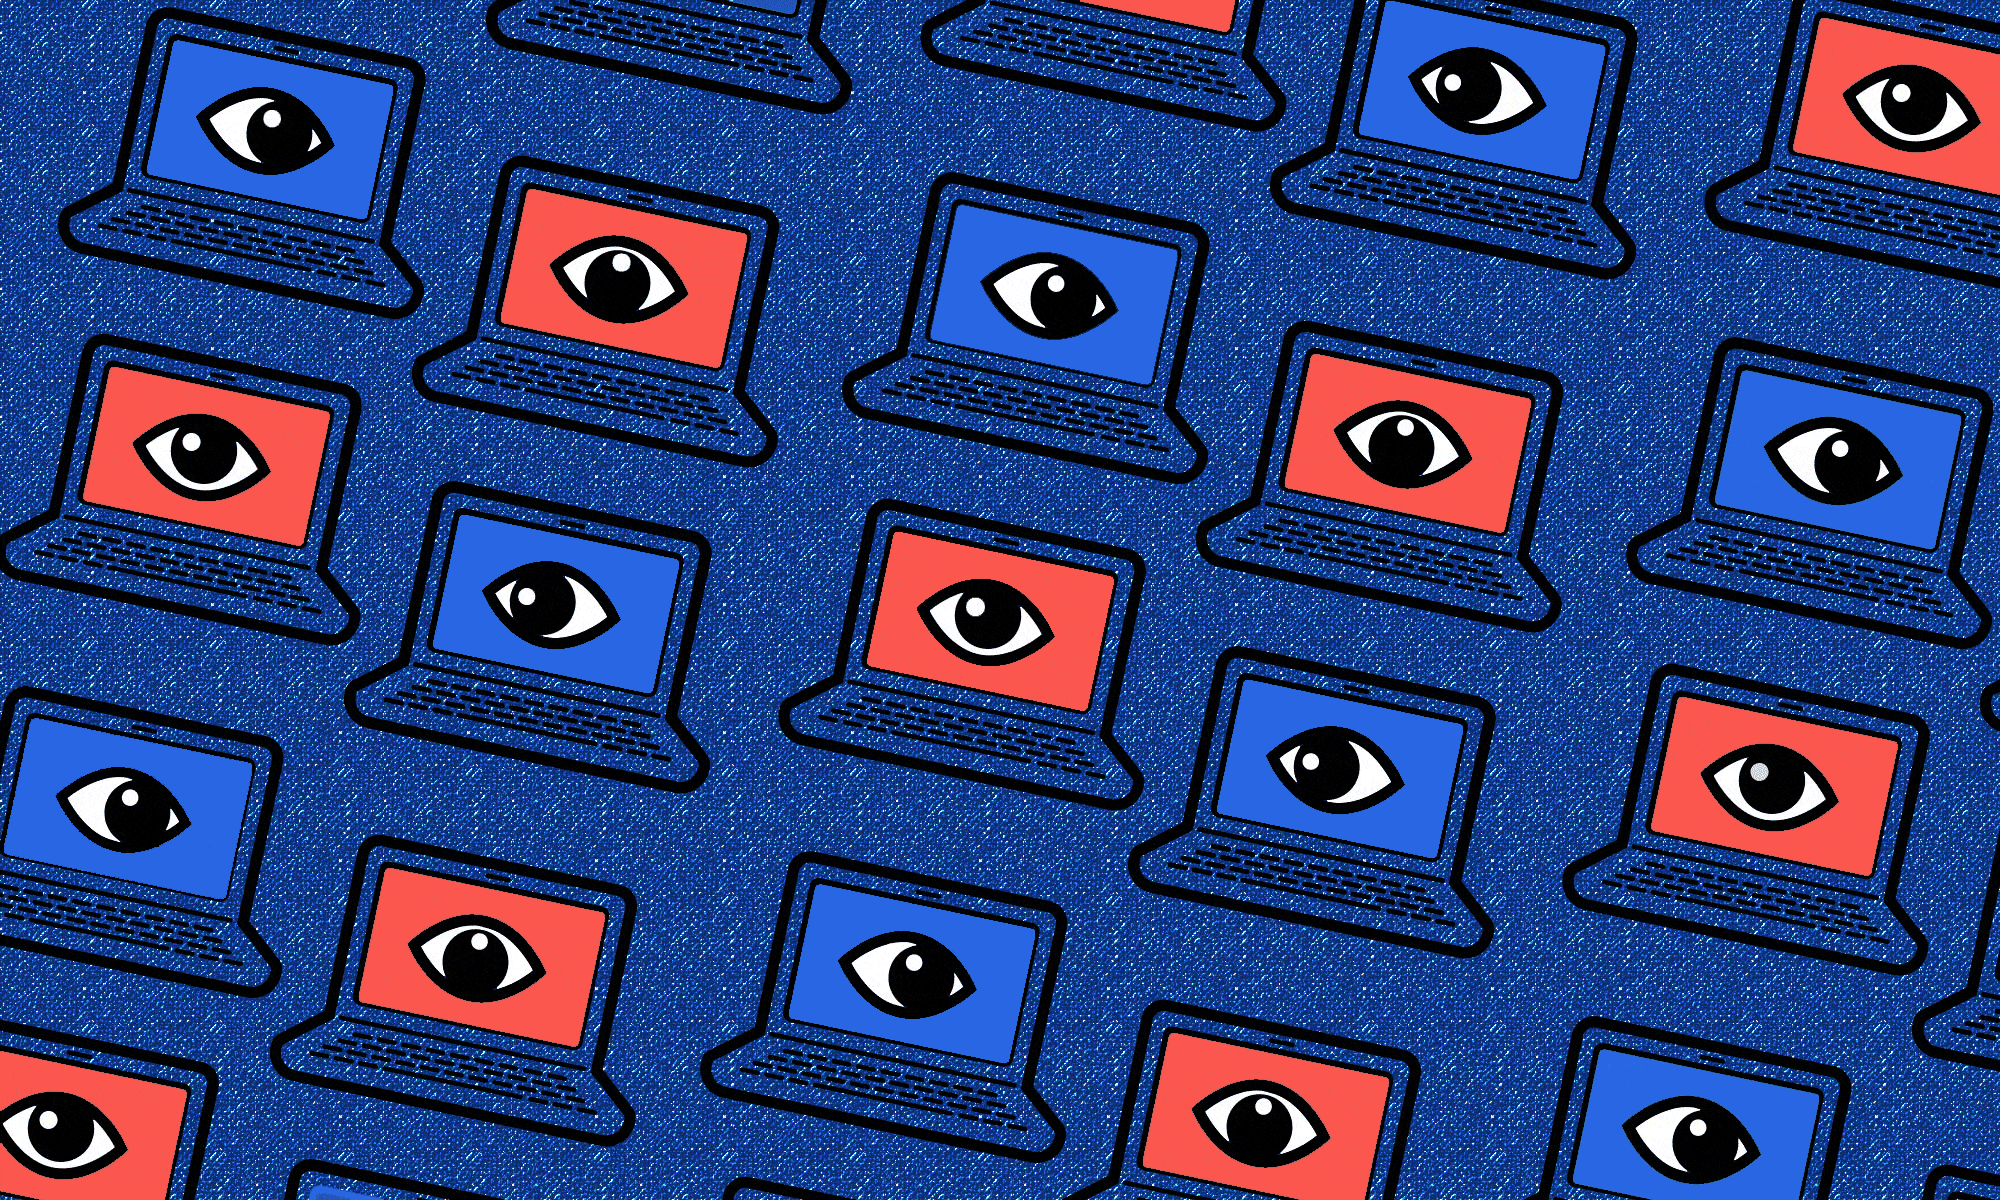 Can privacy online be guaranteed? And technologies that help